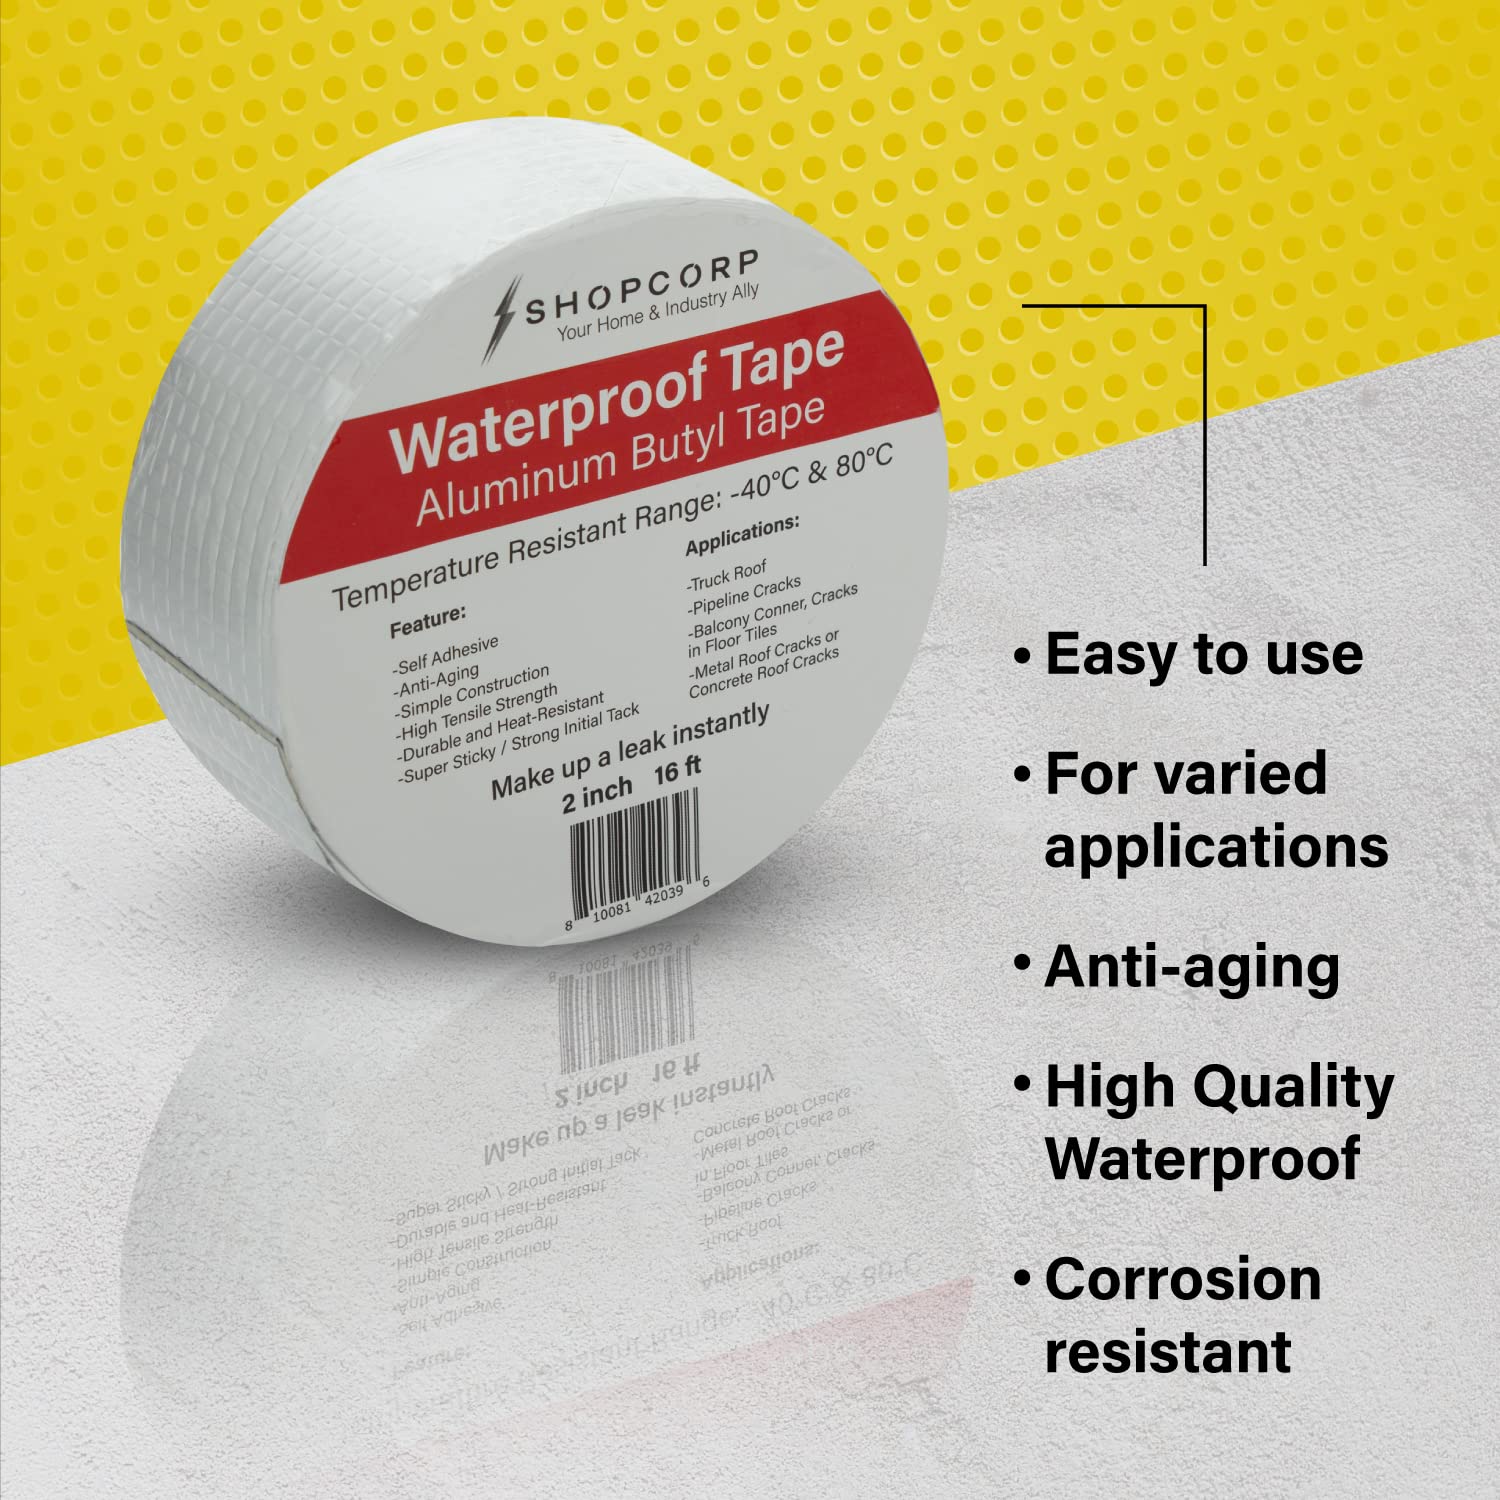 8 Uses for Butyl Tape and Where to Find it